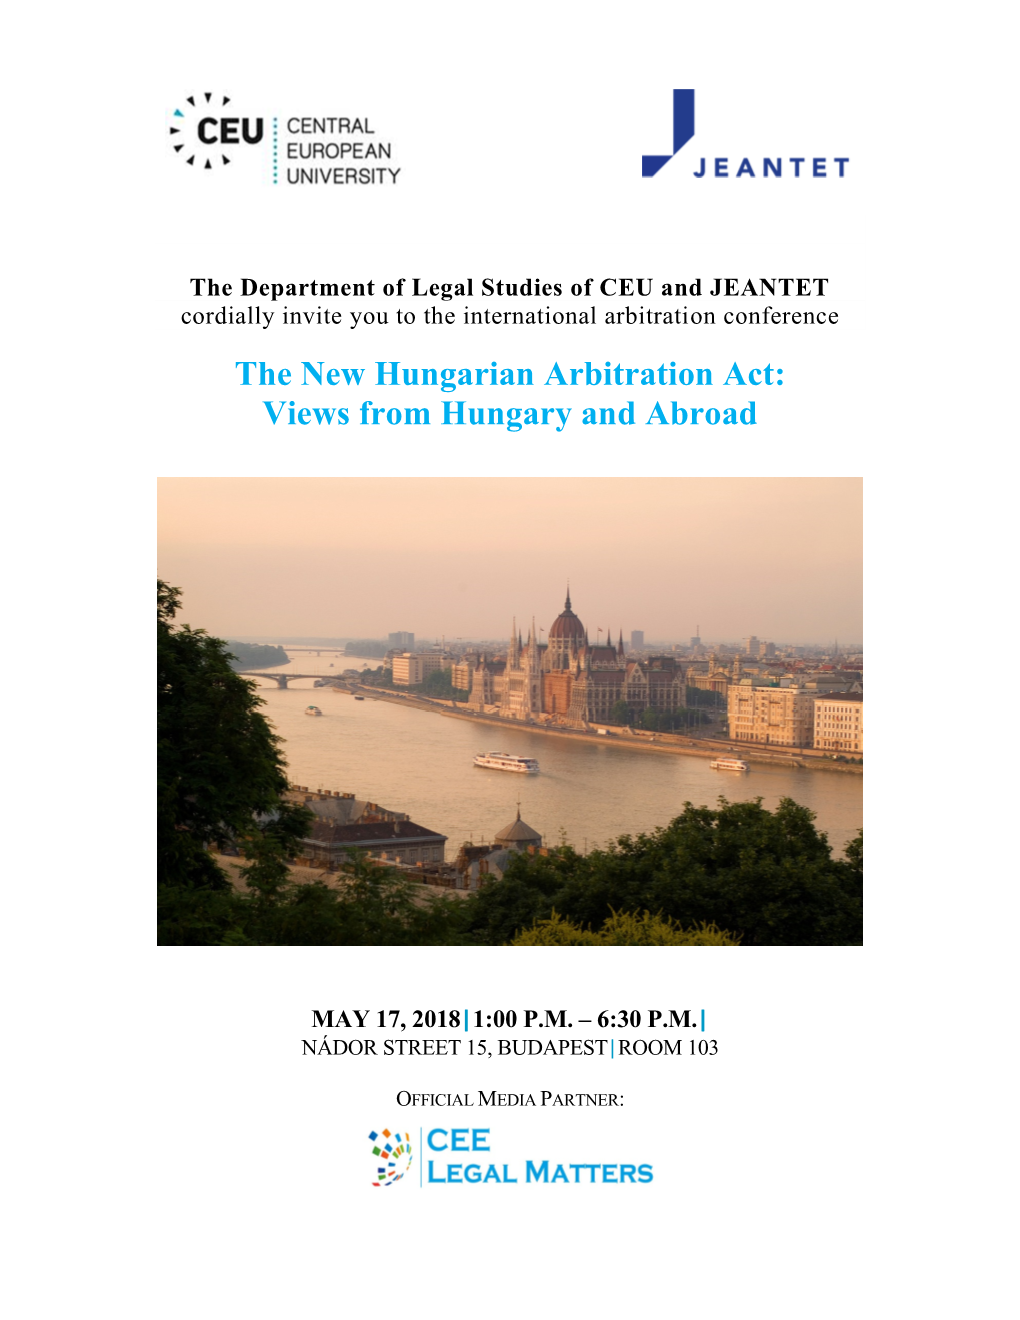 The New Hungarian Arbitration Act: Views from Hungary and Abroad